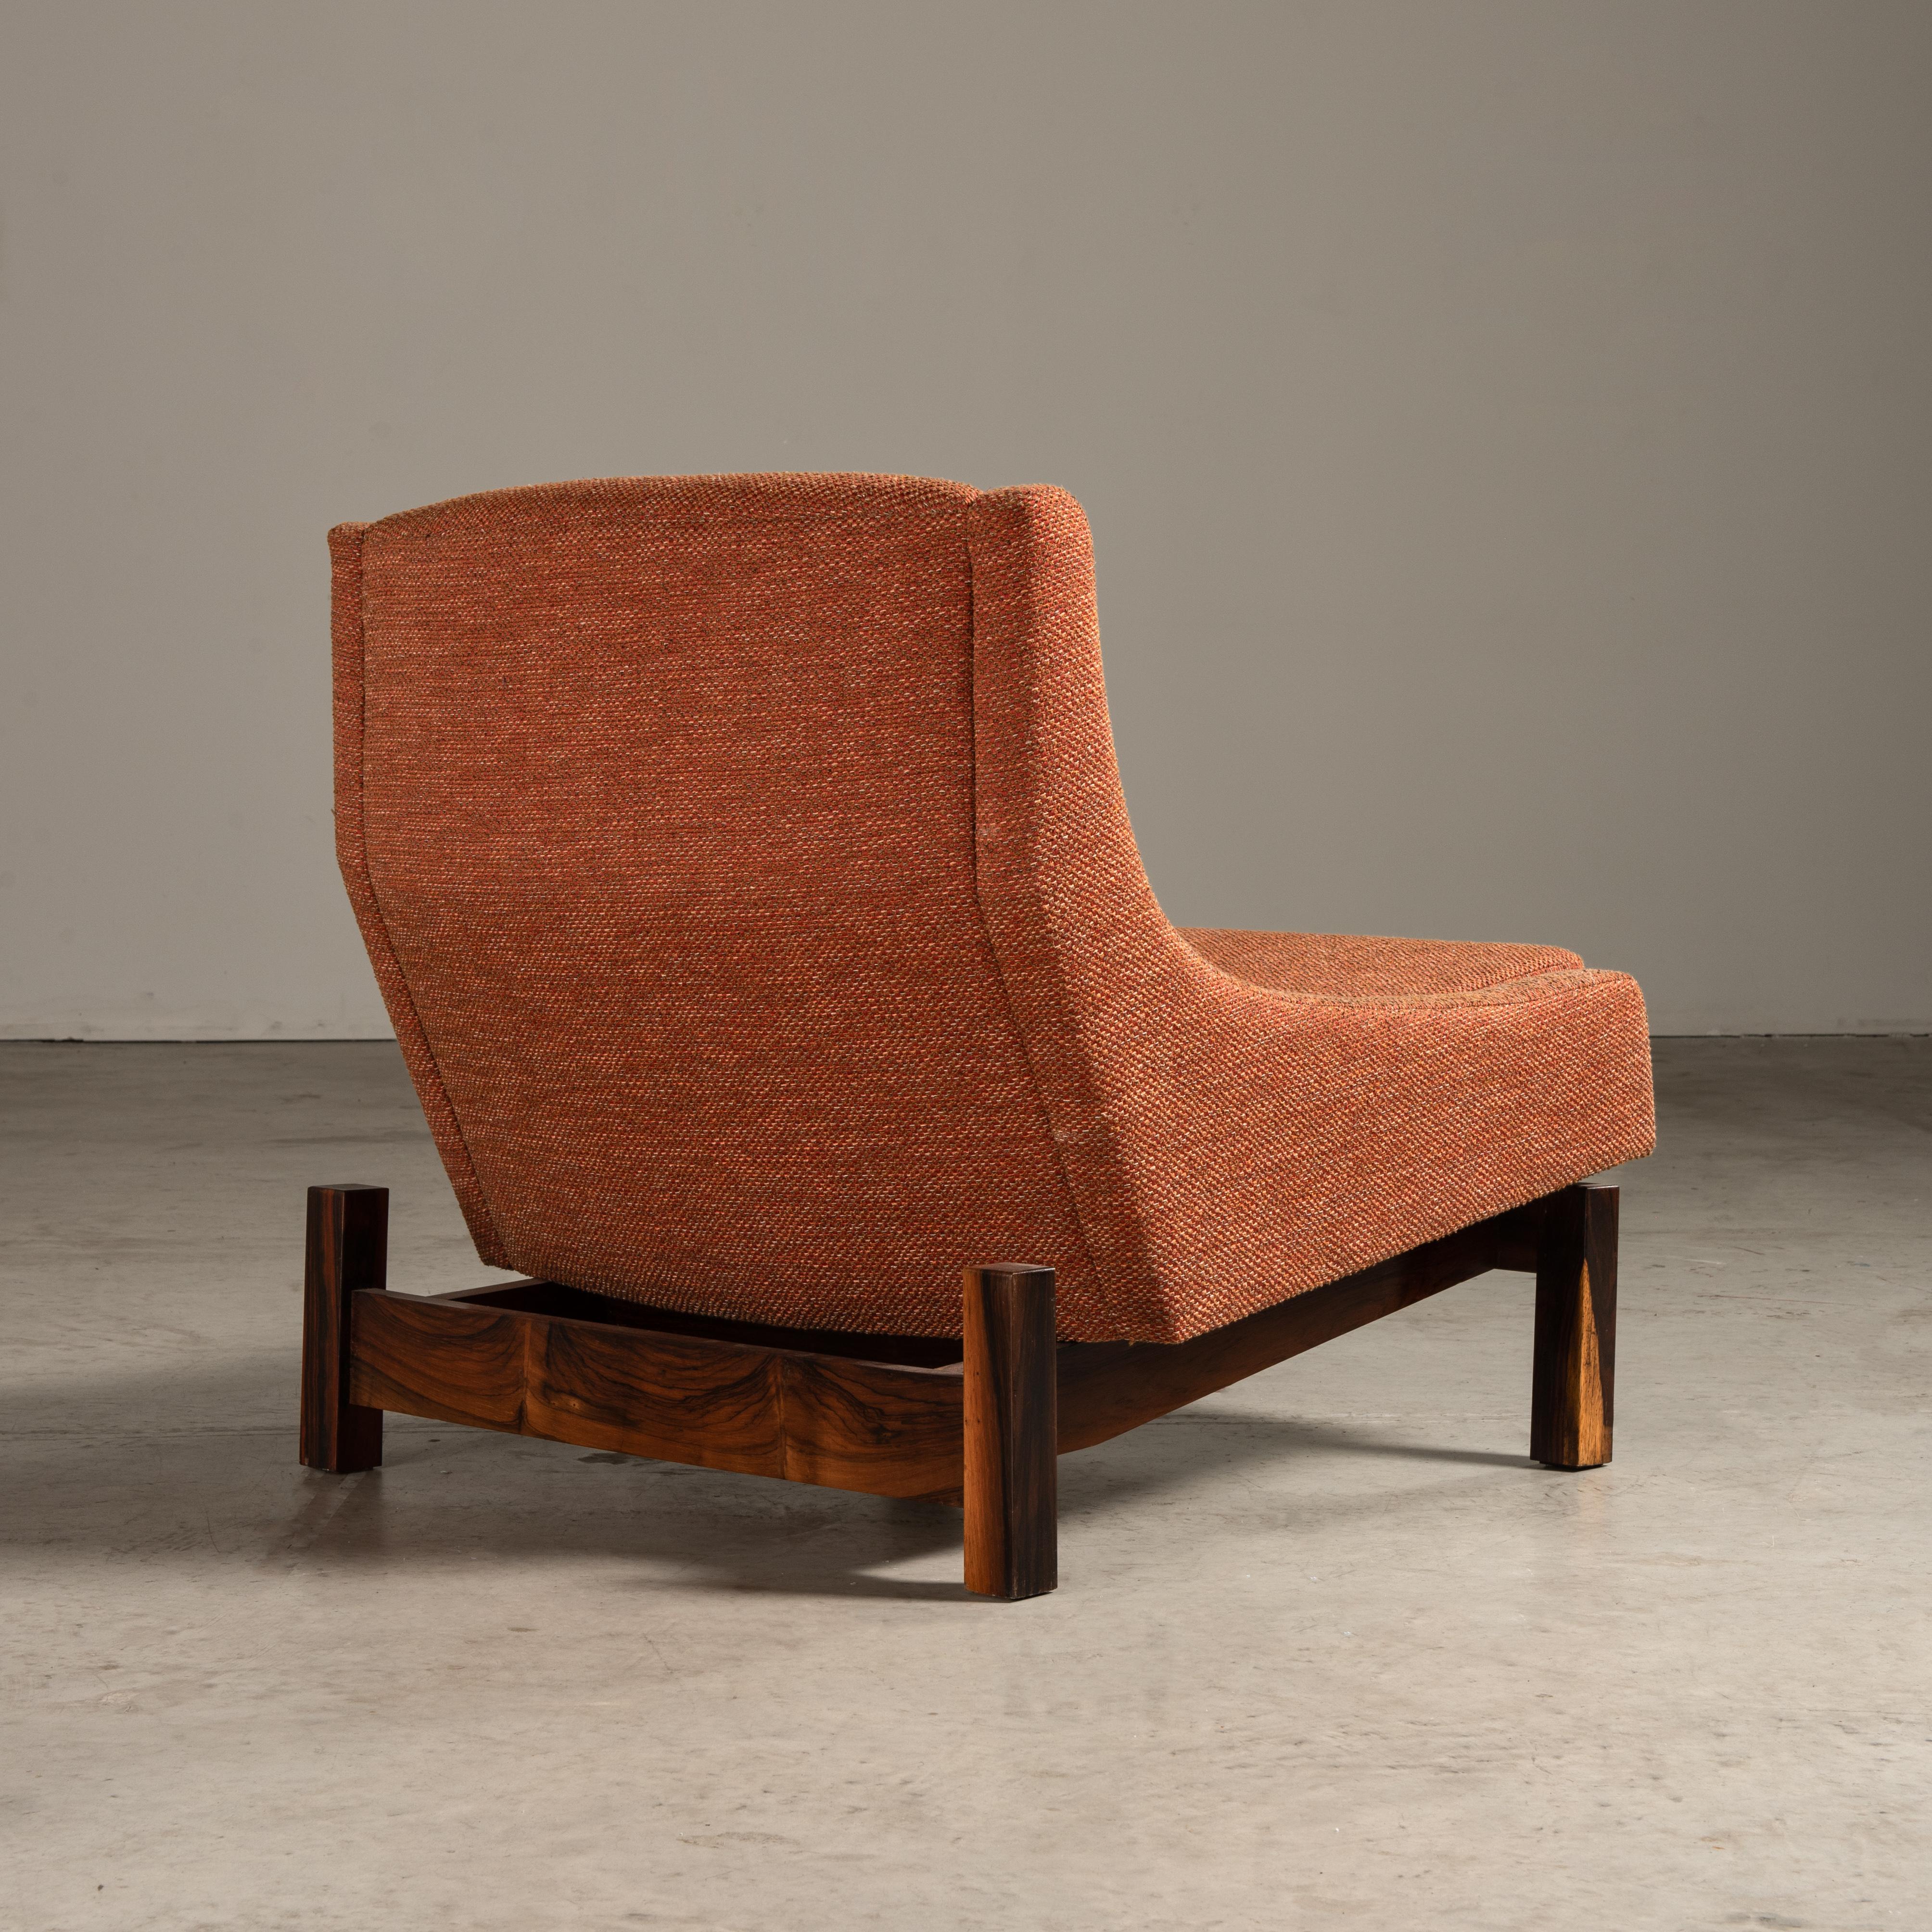 'Paraty´ Lounge Chair, by Sergio Rodrigues, Brazilian Mid-Century Modern Design  For Sale 1